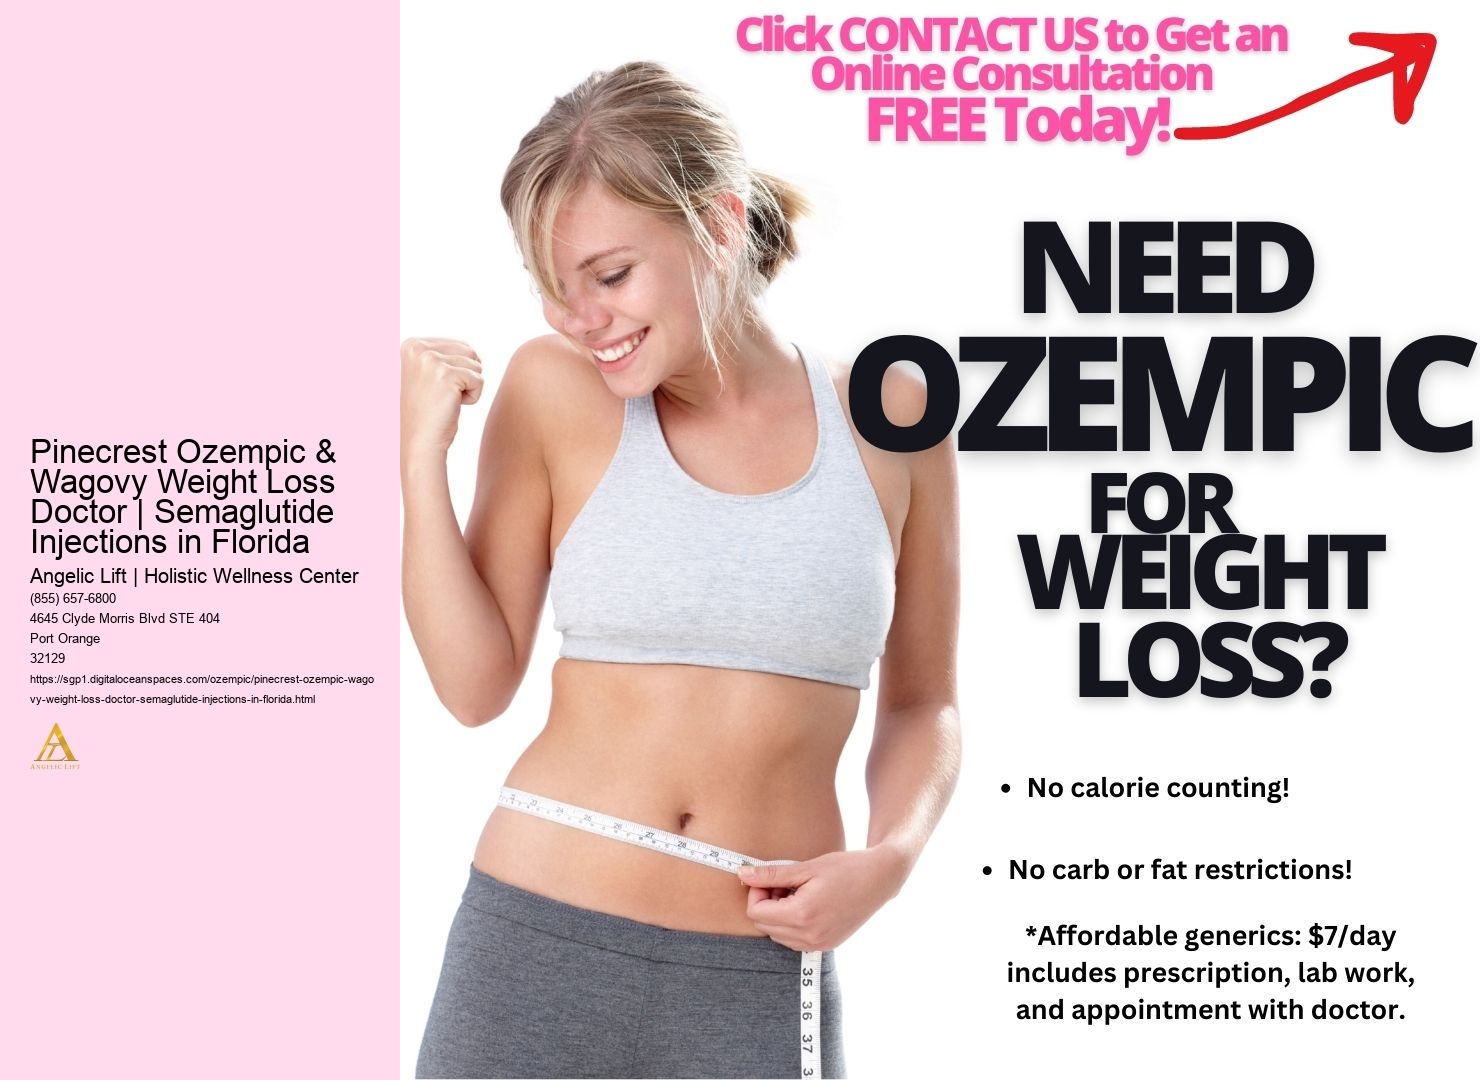 Pinecrest Ozempic & Wagovy Weight Loss Doctor | Semaglutide Injections in Florida